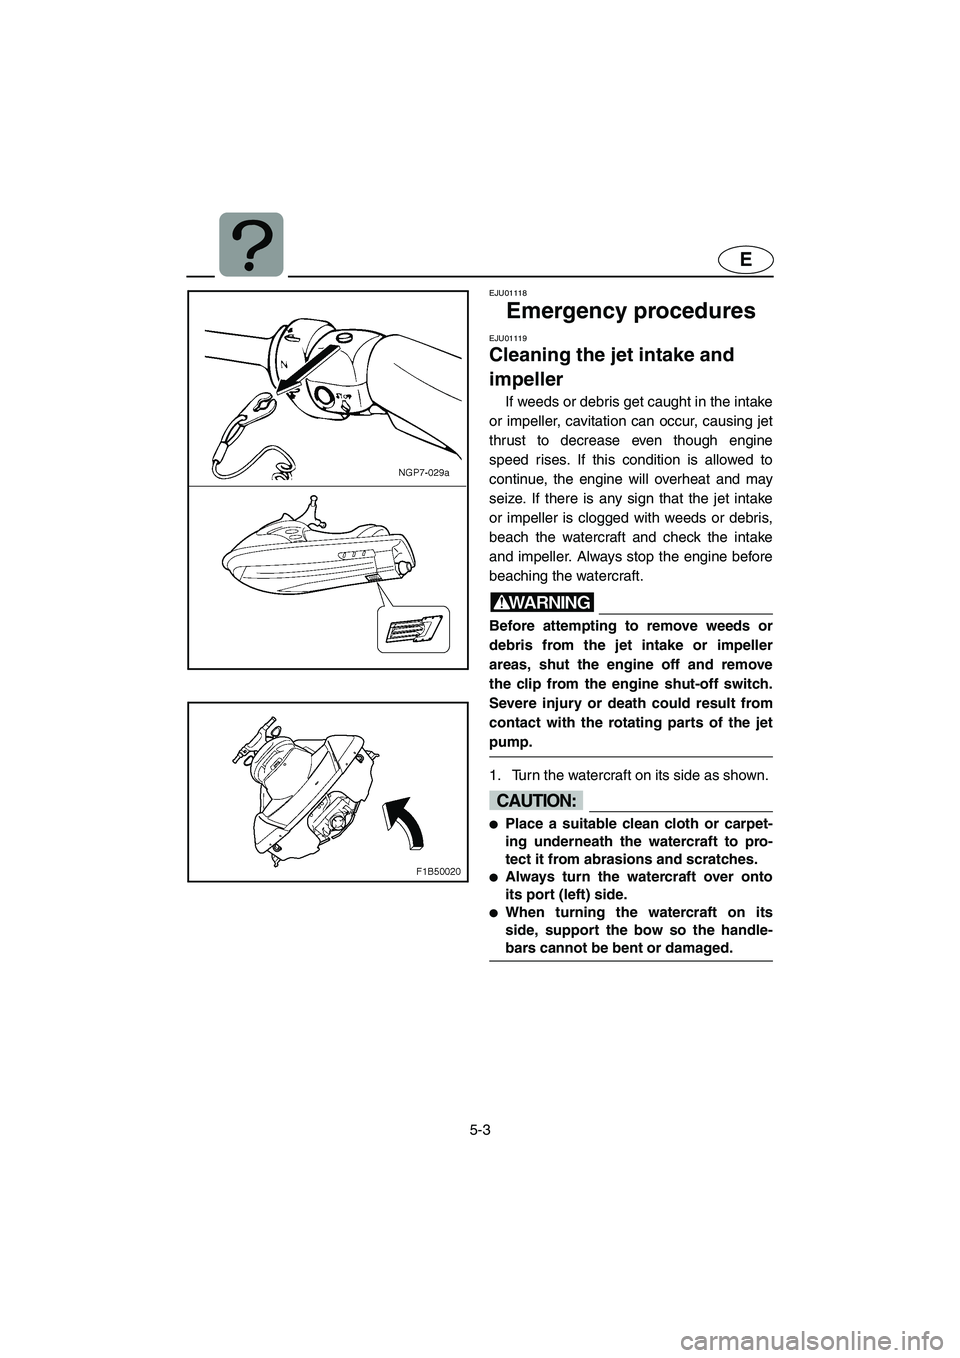 YAMAHA FX 2003  Owners Manual 5-3
E
EJU01118 
Emergency procedures 
EJU01119 
Cleaning the jet intake and 
impeller  
If weeds or debris get caught in the intake
or impeller, cavitation can occur, causing jet
thrust to decrease ev